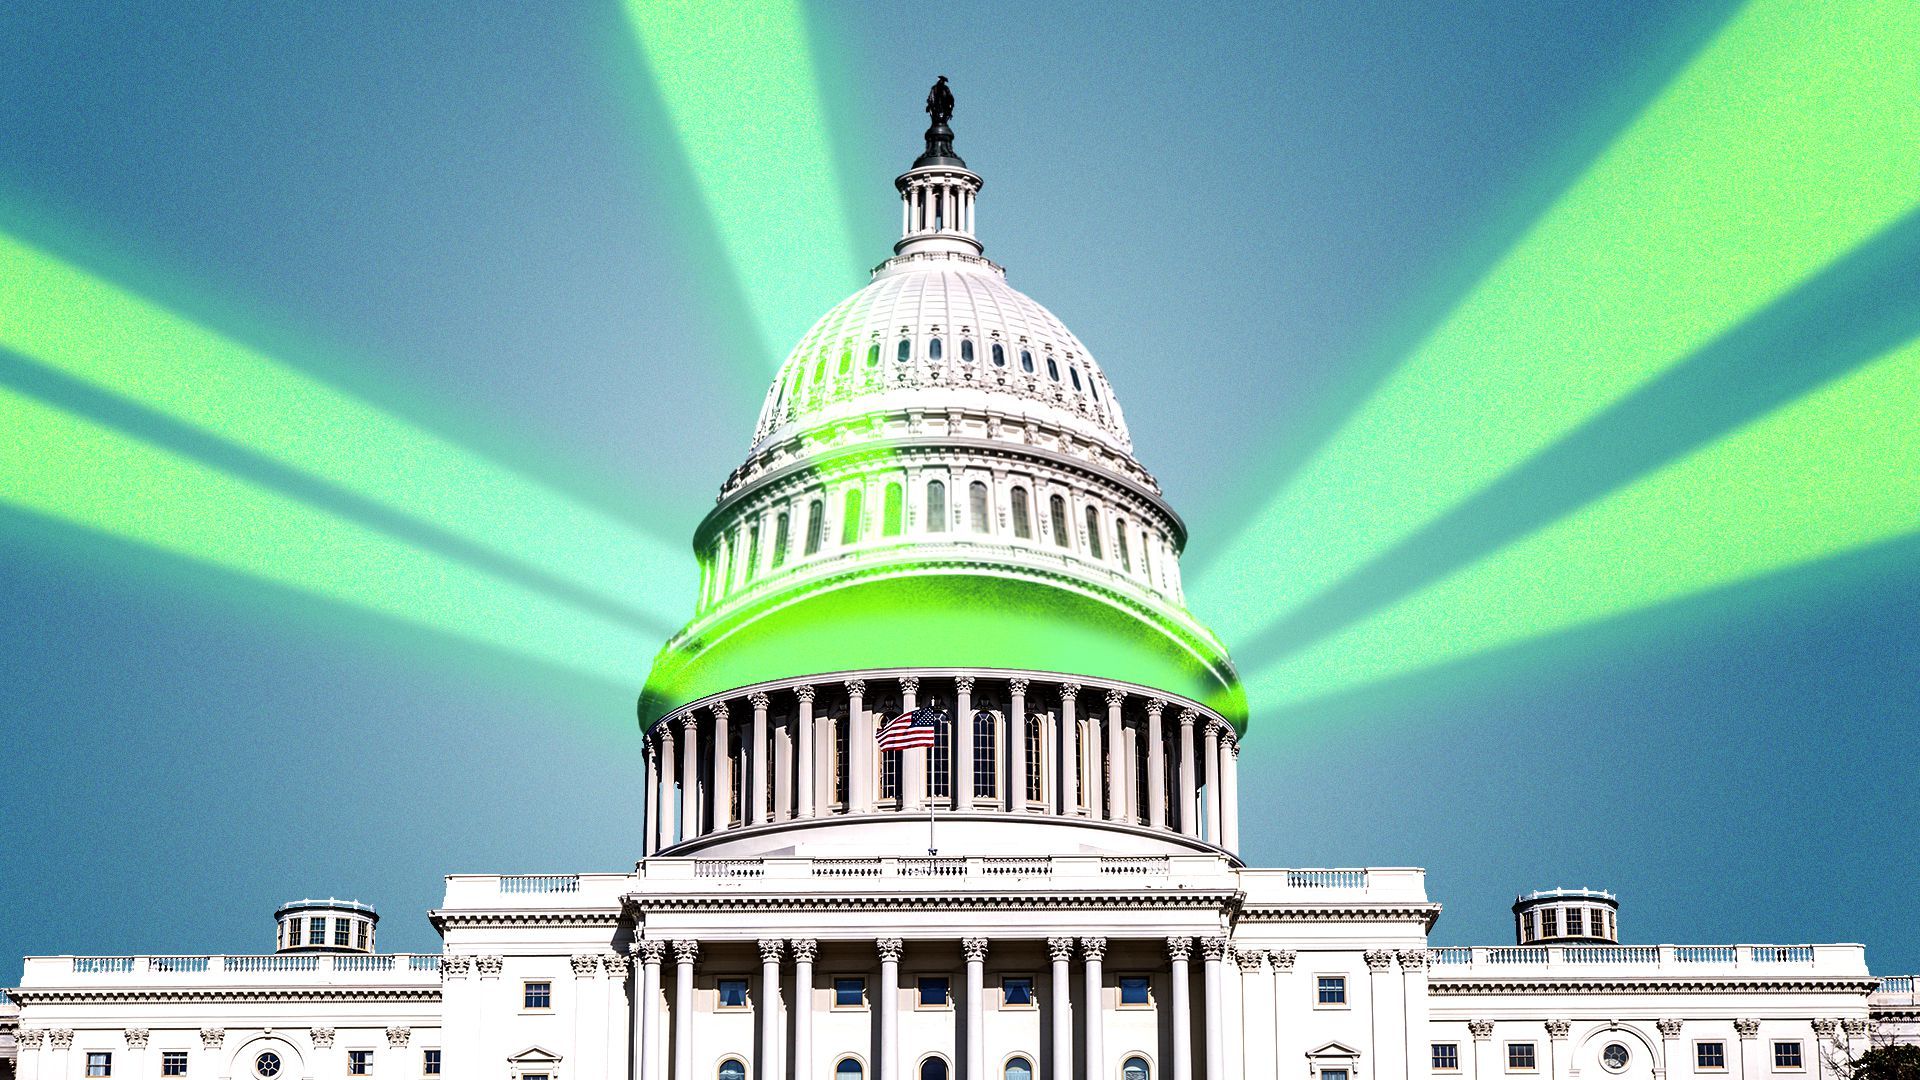 Illustration of the Capitol building's dome lifting upward, letting glowing beams of lights escape from inside